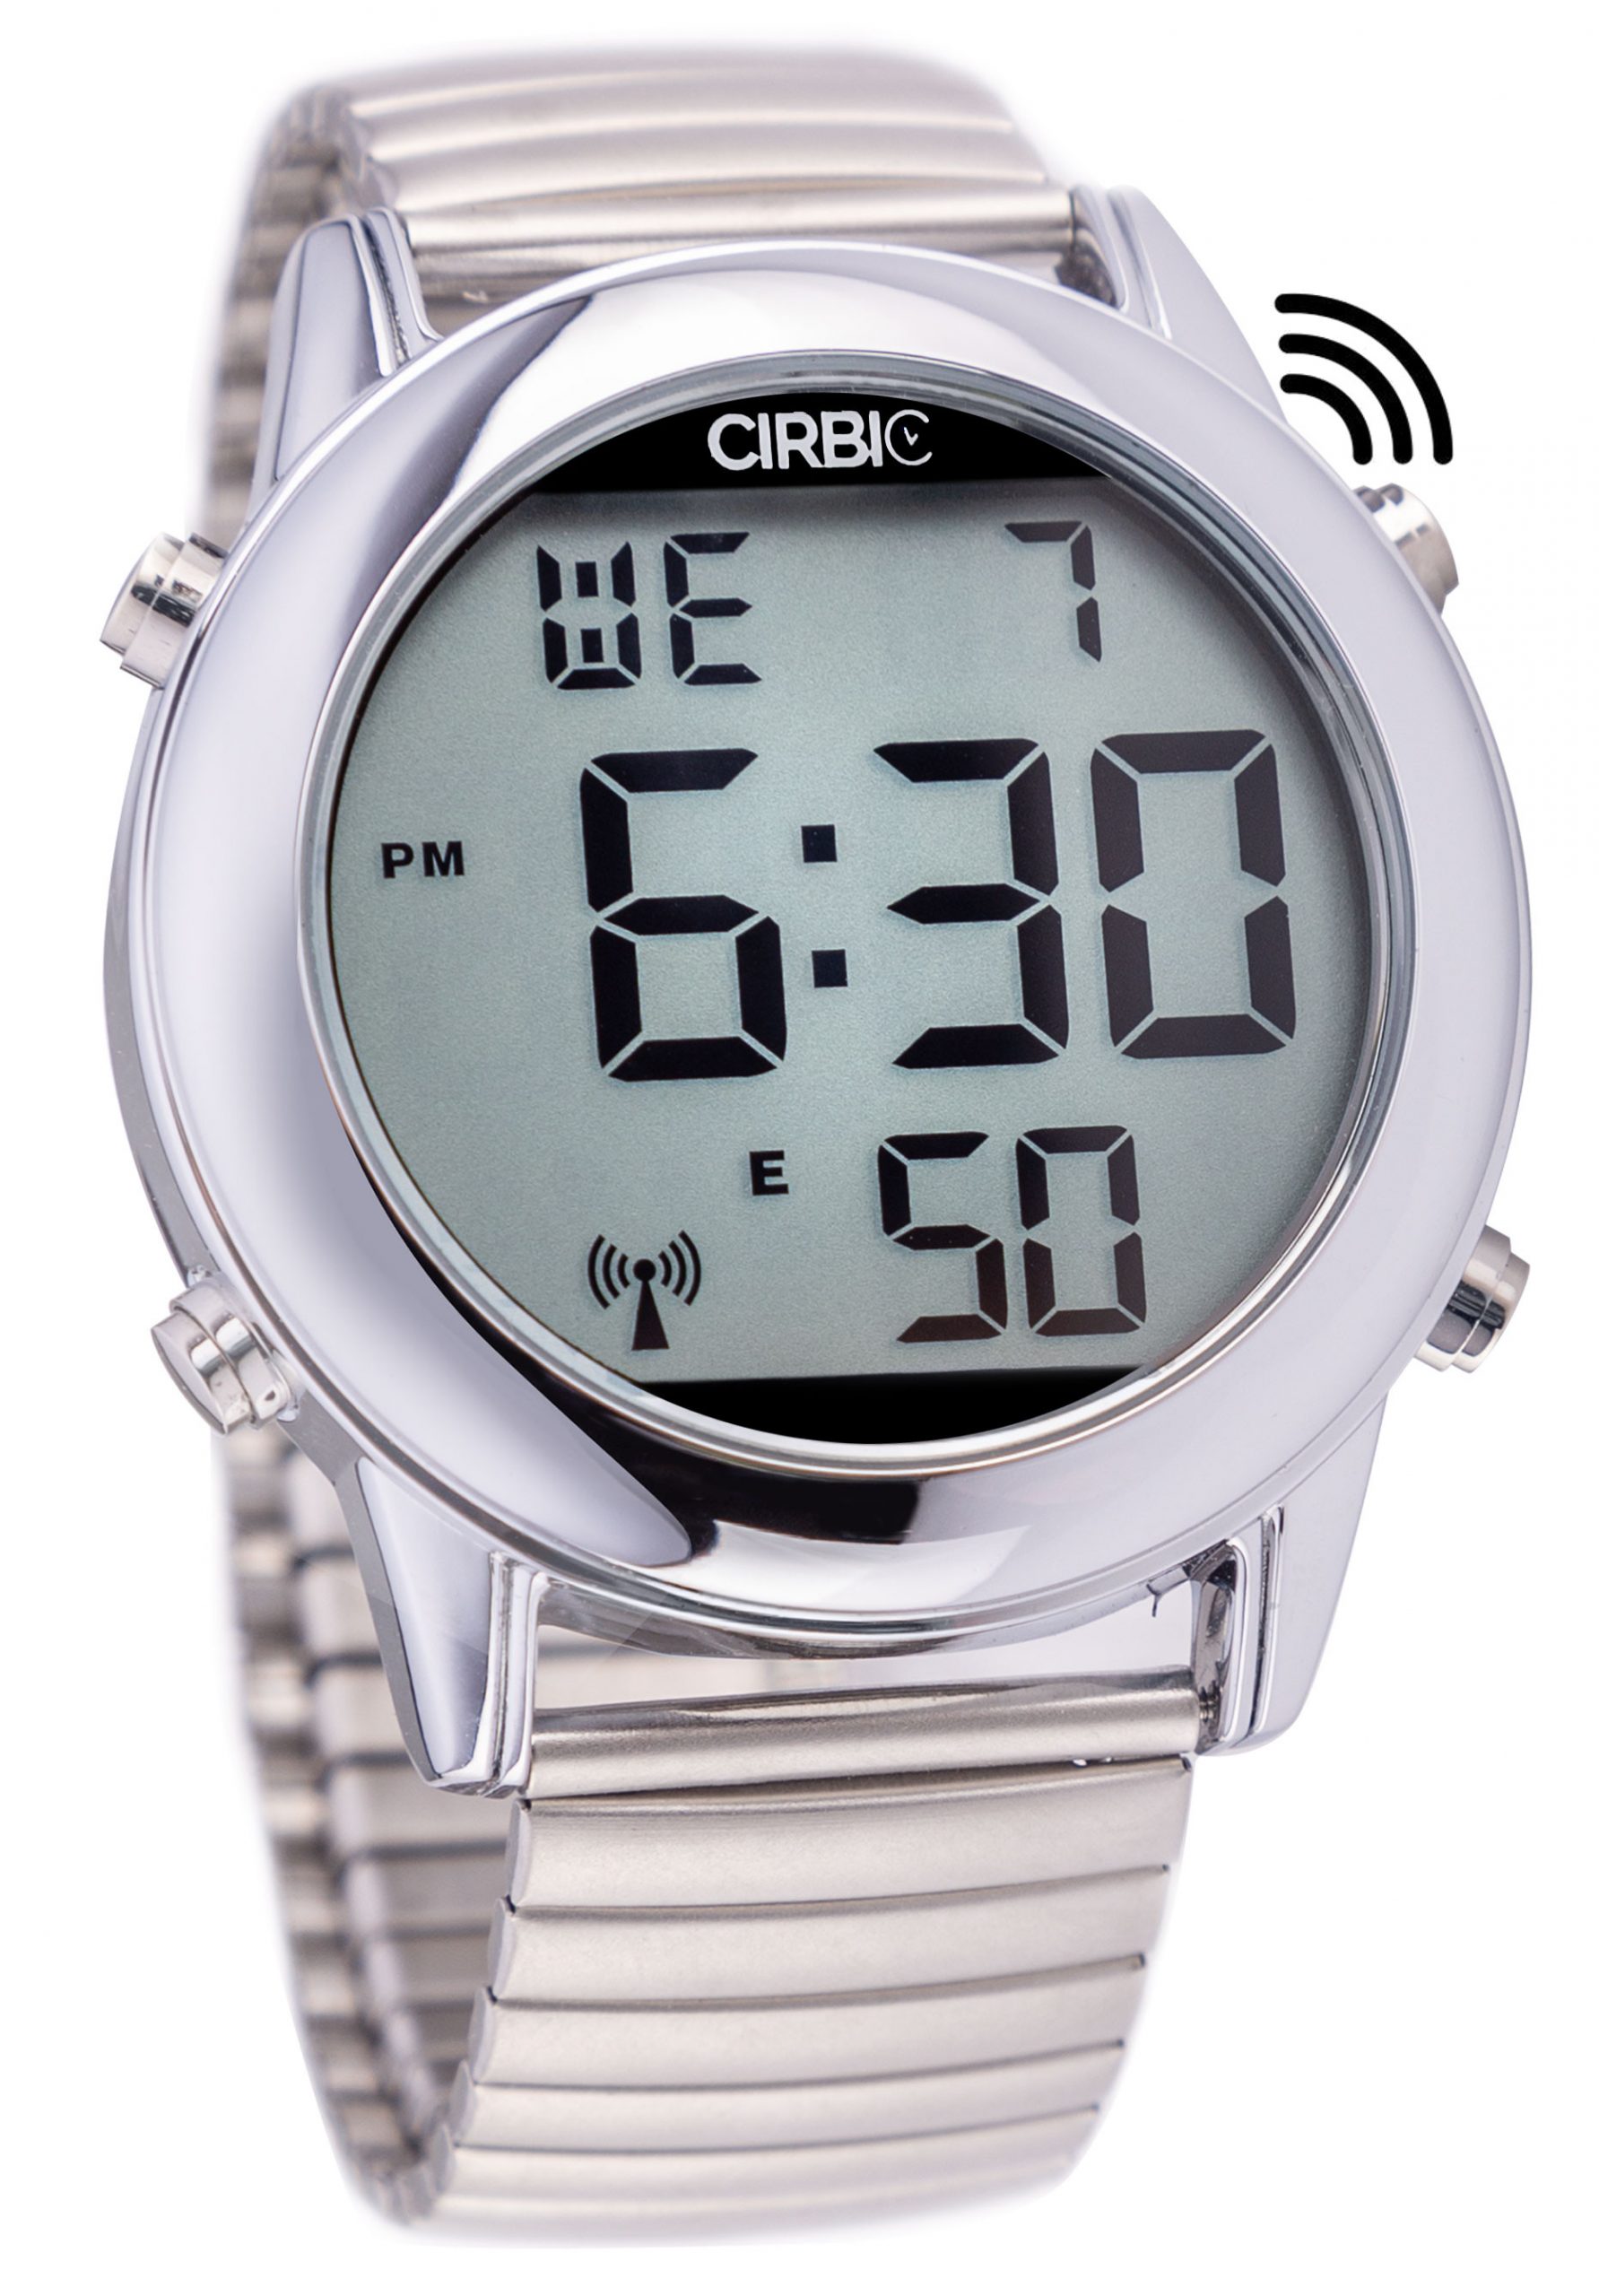 Cirbic Large, Clear English Voice Digital Talking Watch for The Blind, Visually impaired or Elderly.